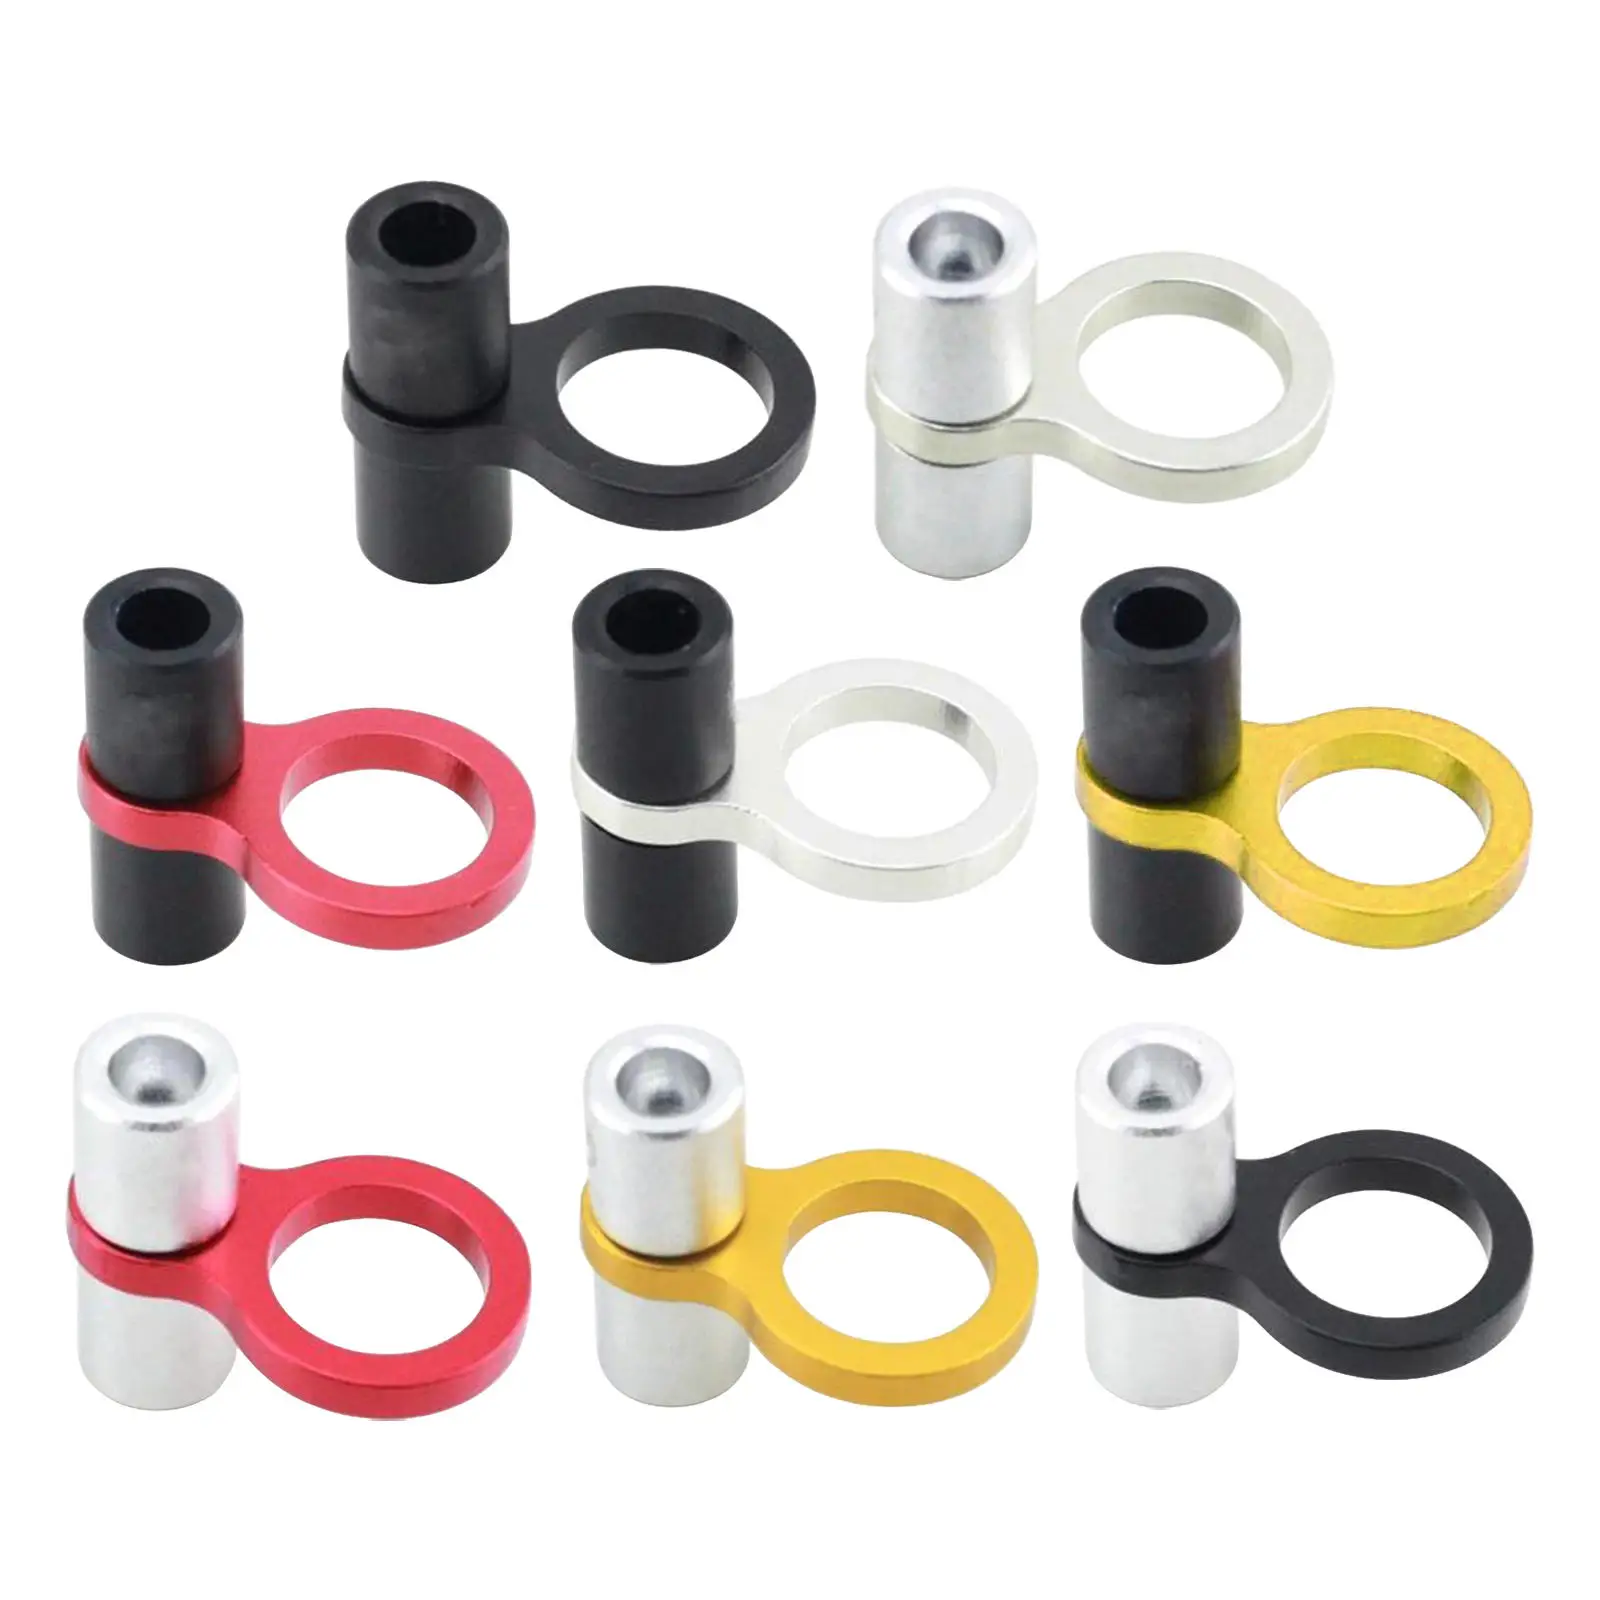 Bicycle Oil Tube Fixed Clips Bike Brake Guide Cable Tube Fixed Clamp Frame Buckle for Brompton Folding Bike